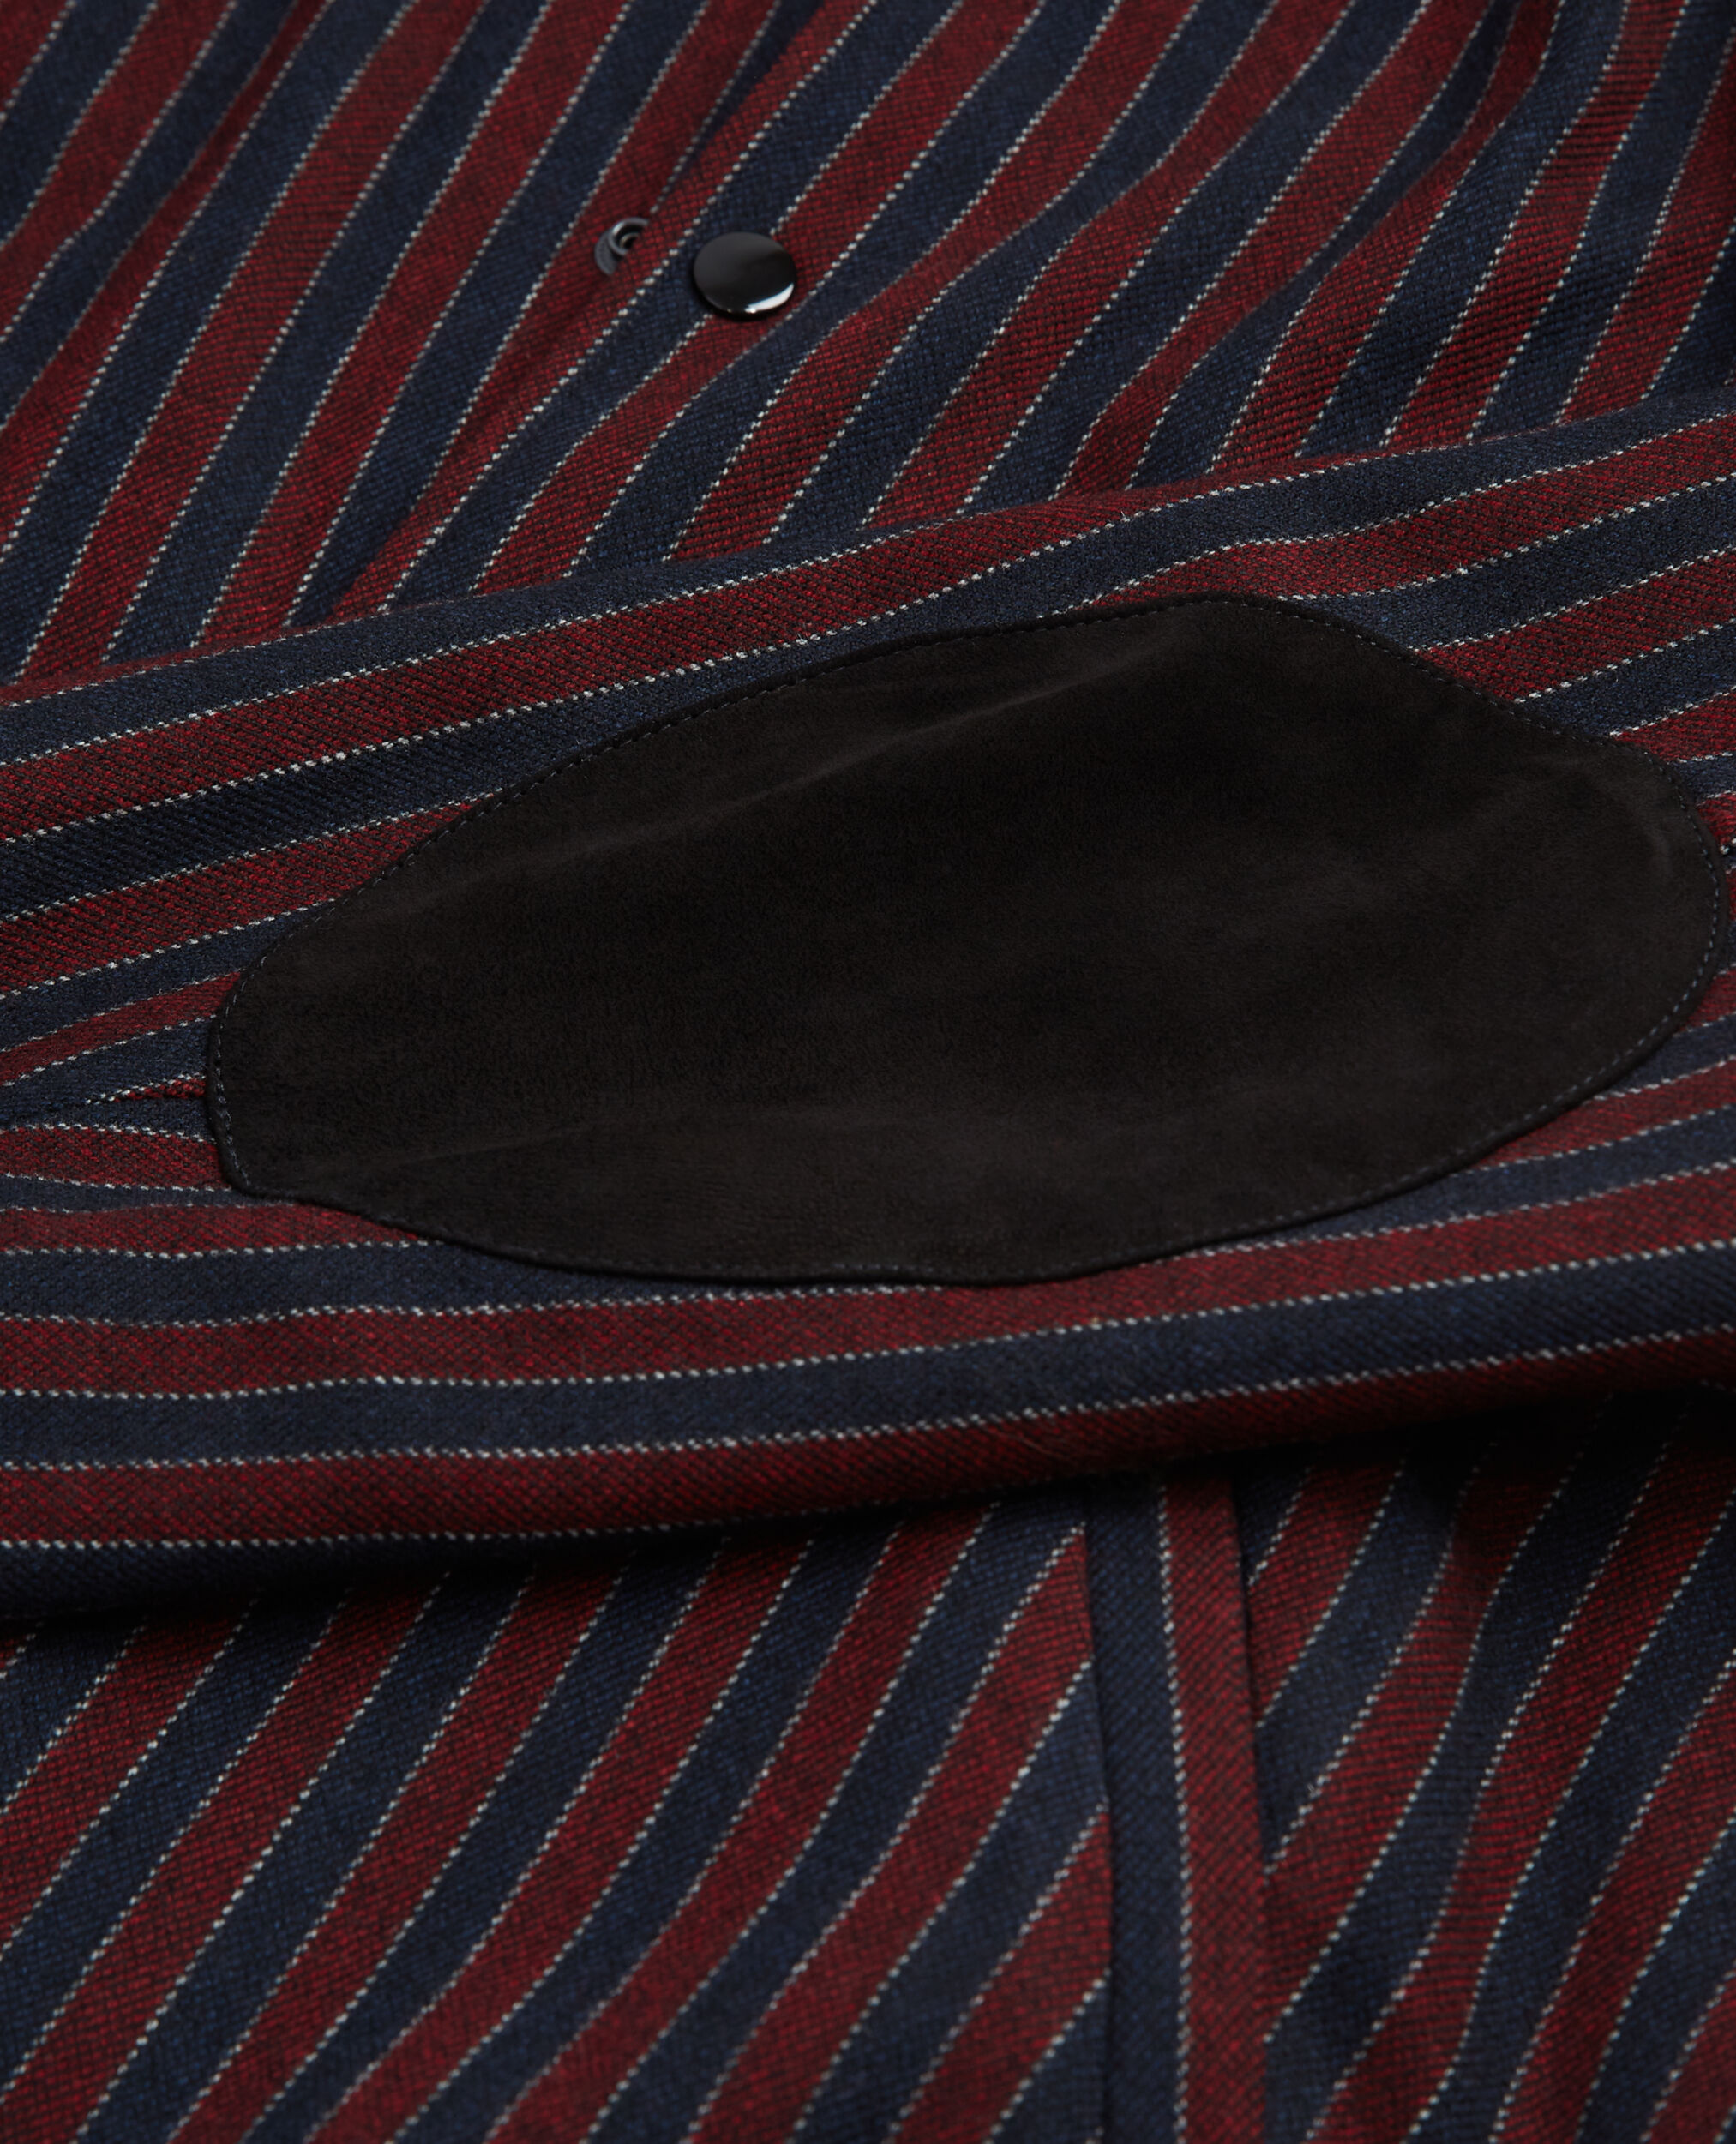 Chaqueta rayas, BORDEAUX / NAVY, hi-res image number null